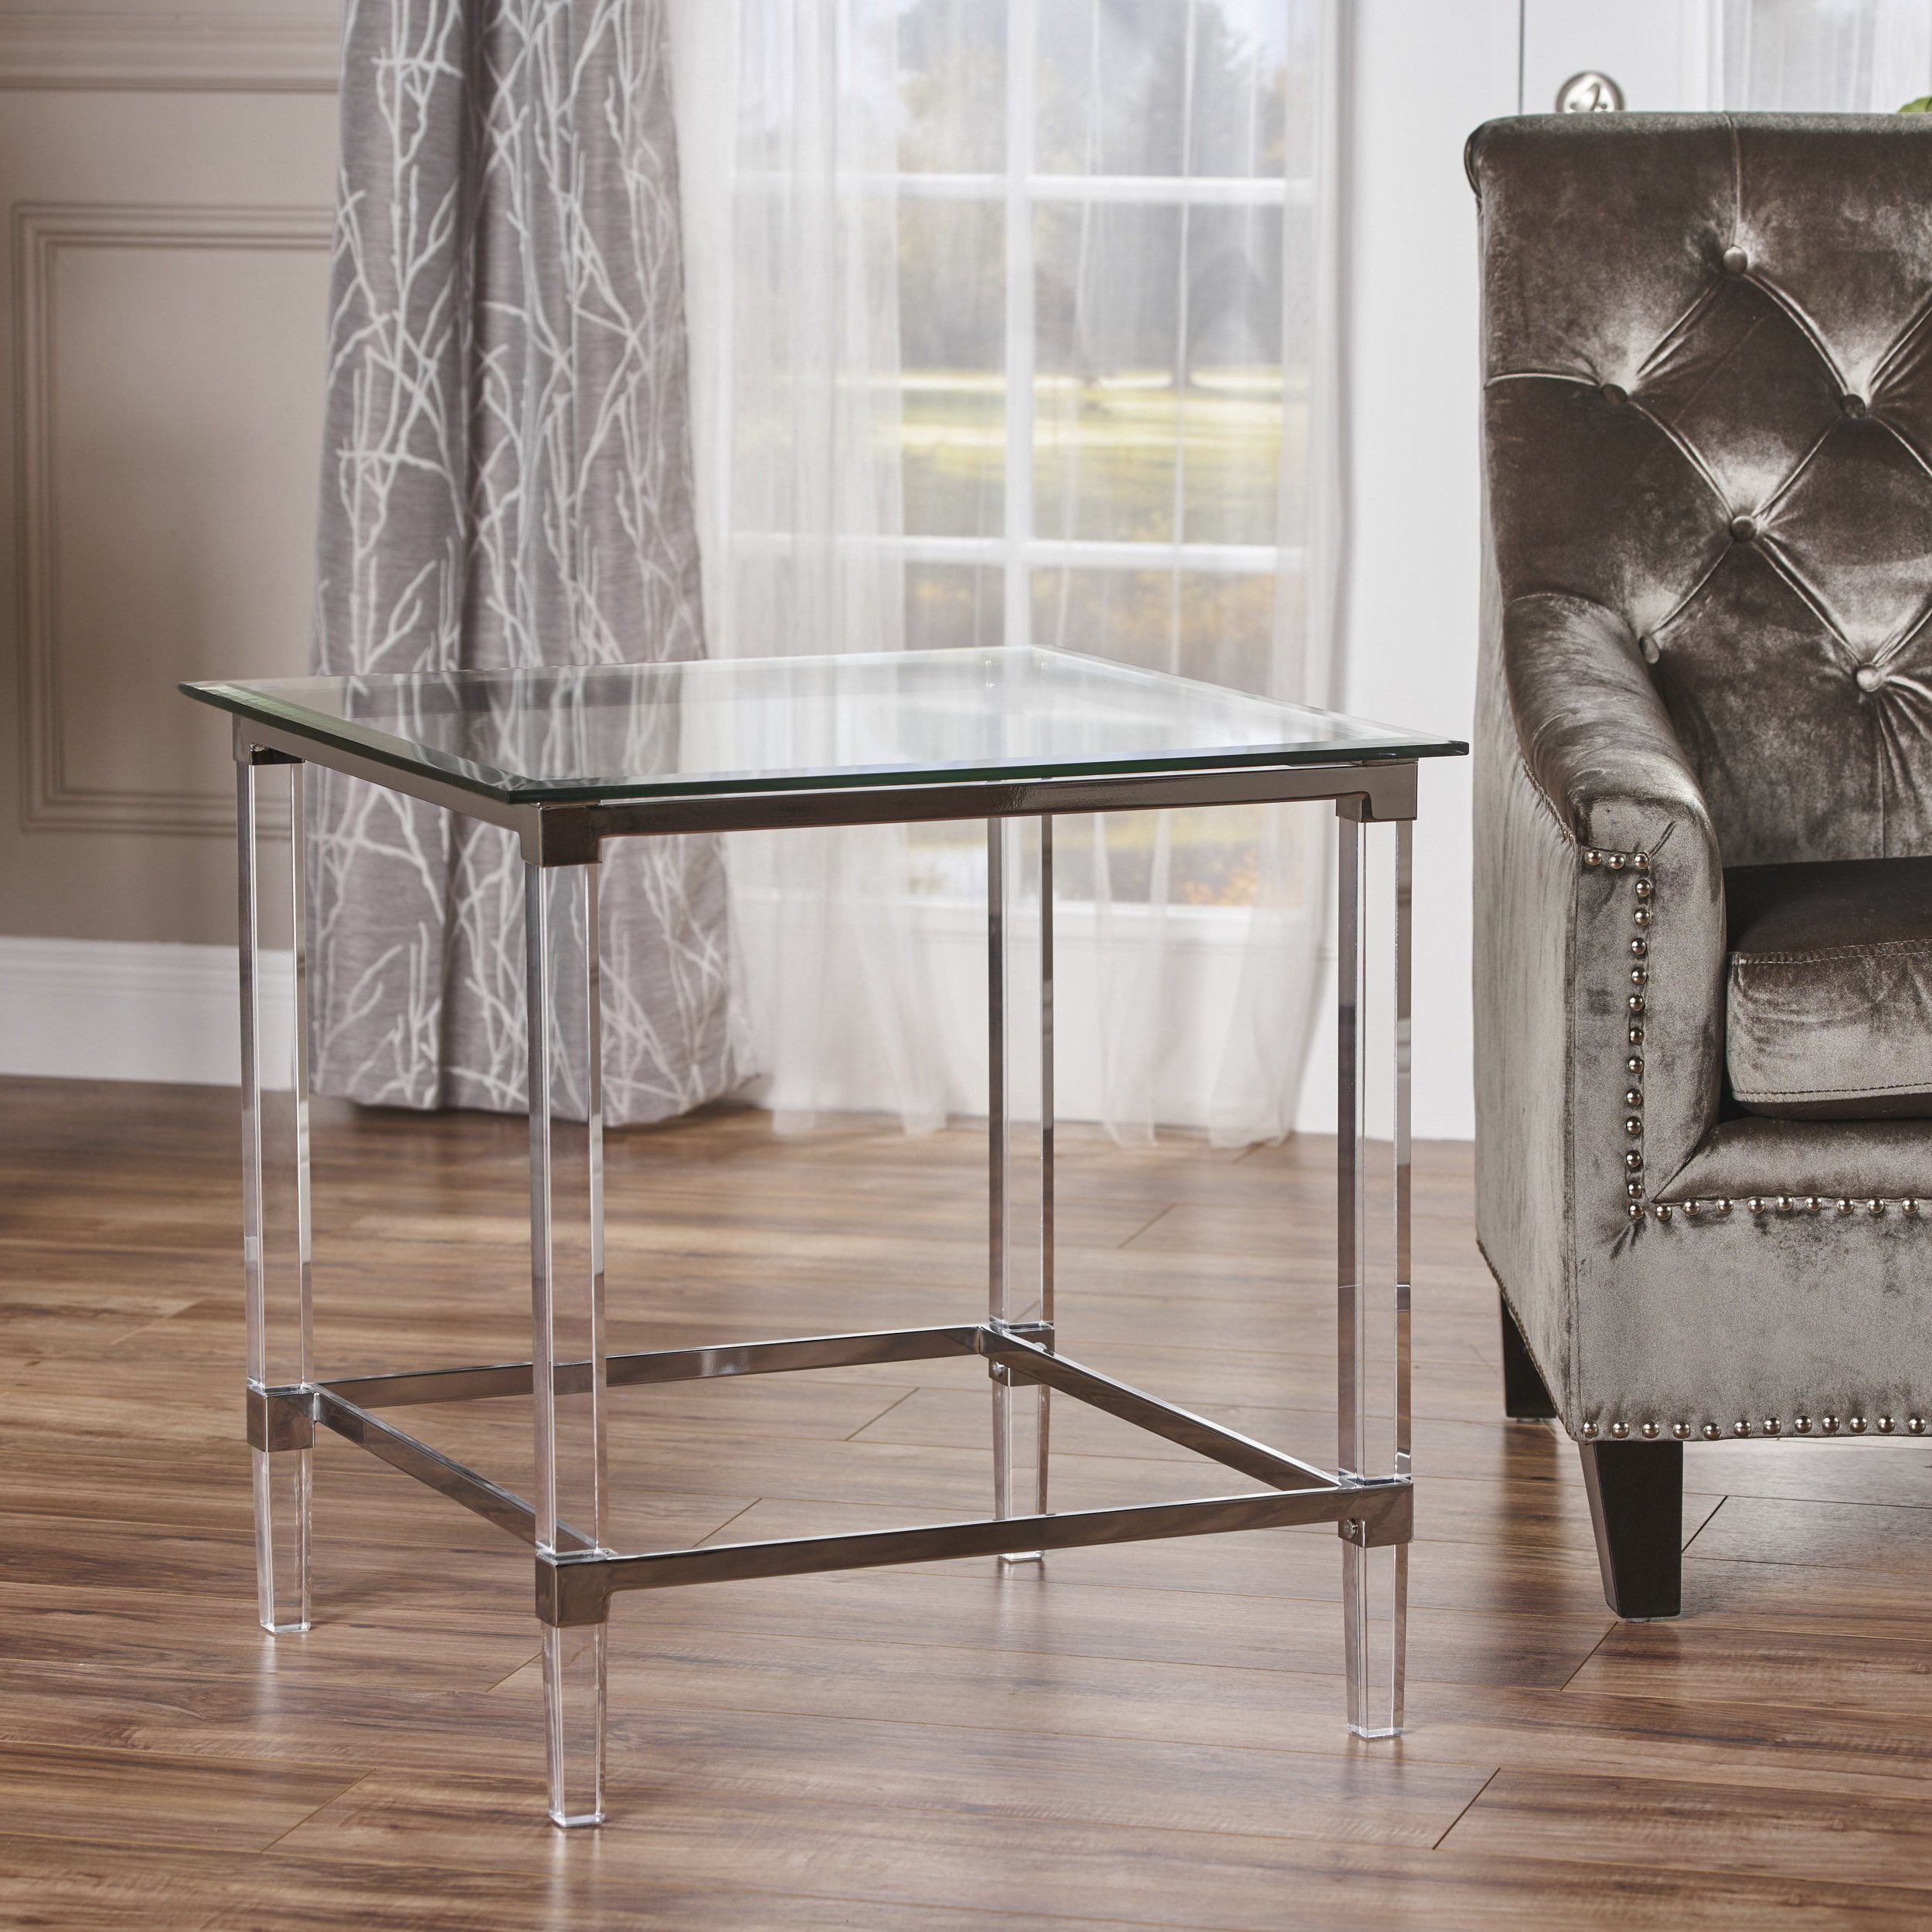 Great Deal Furniture 302234 Orson Acrylic And Tempered Pertaining To Famous Gold And Clear Acrylic Side Tables (Gallery 3 of 20)